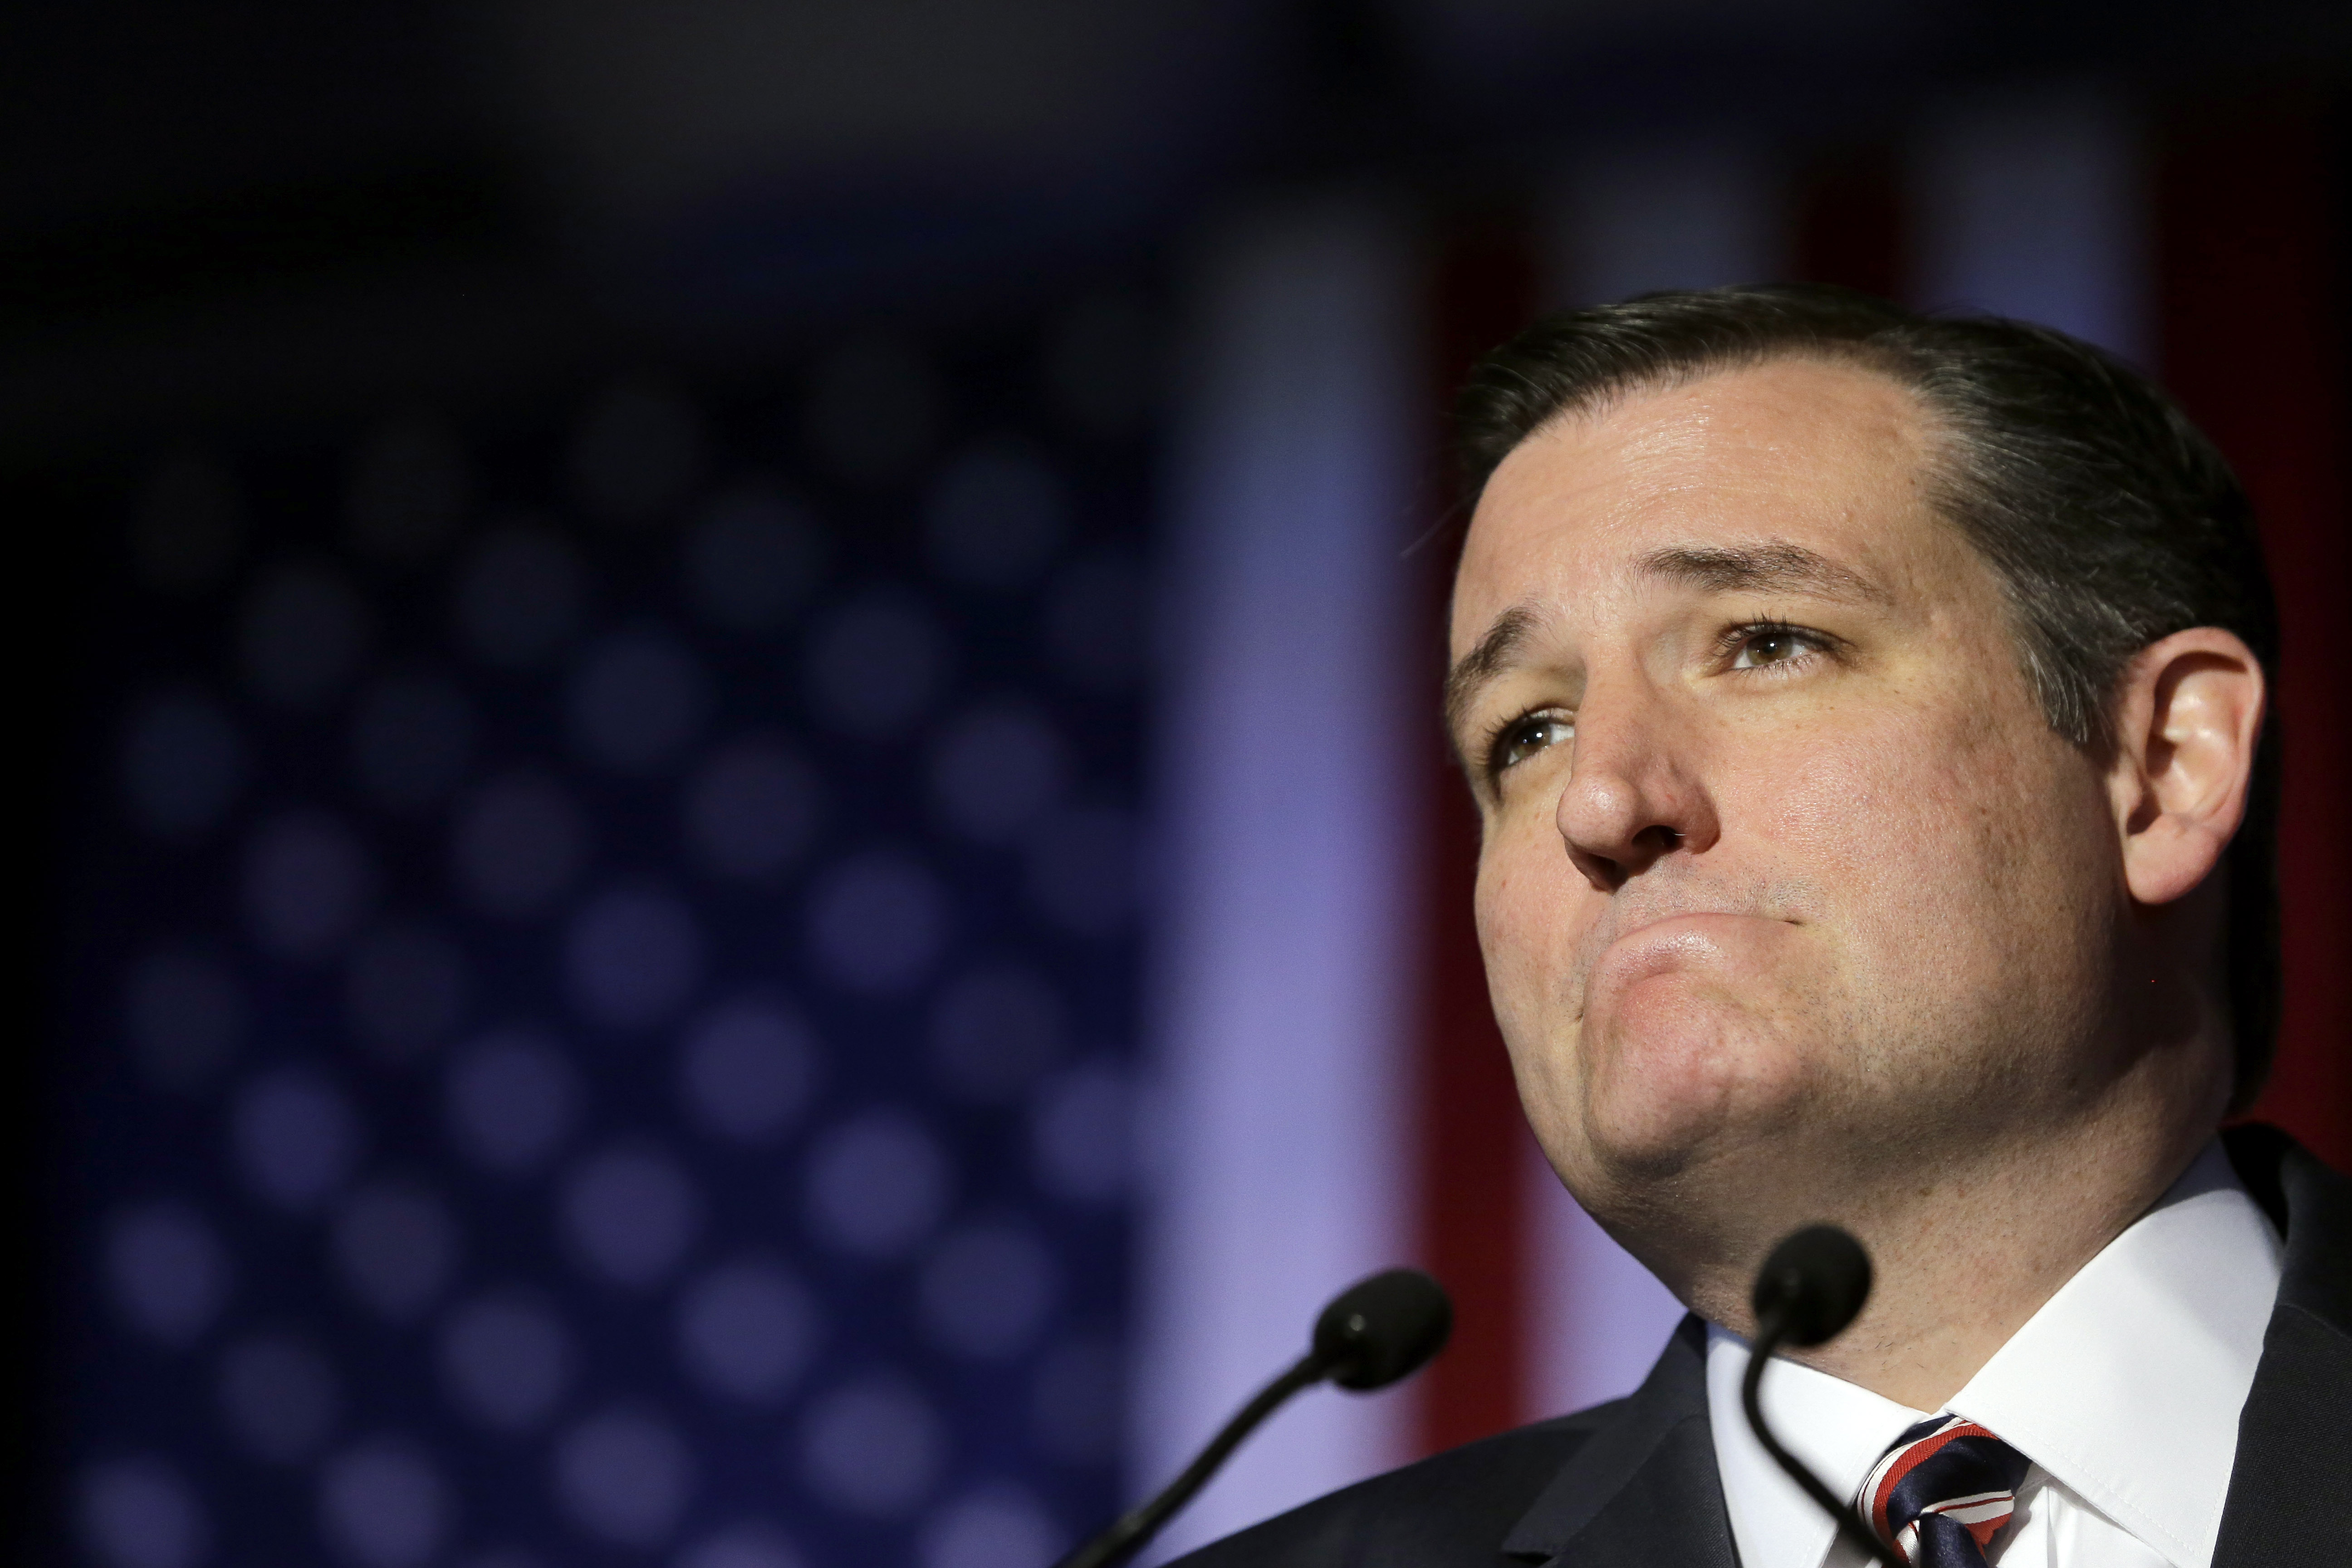 Ted Cruz refused to endorse Donald Trump and the Republican convention.